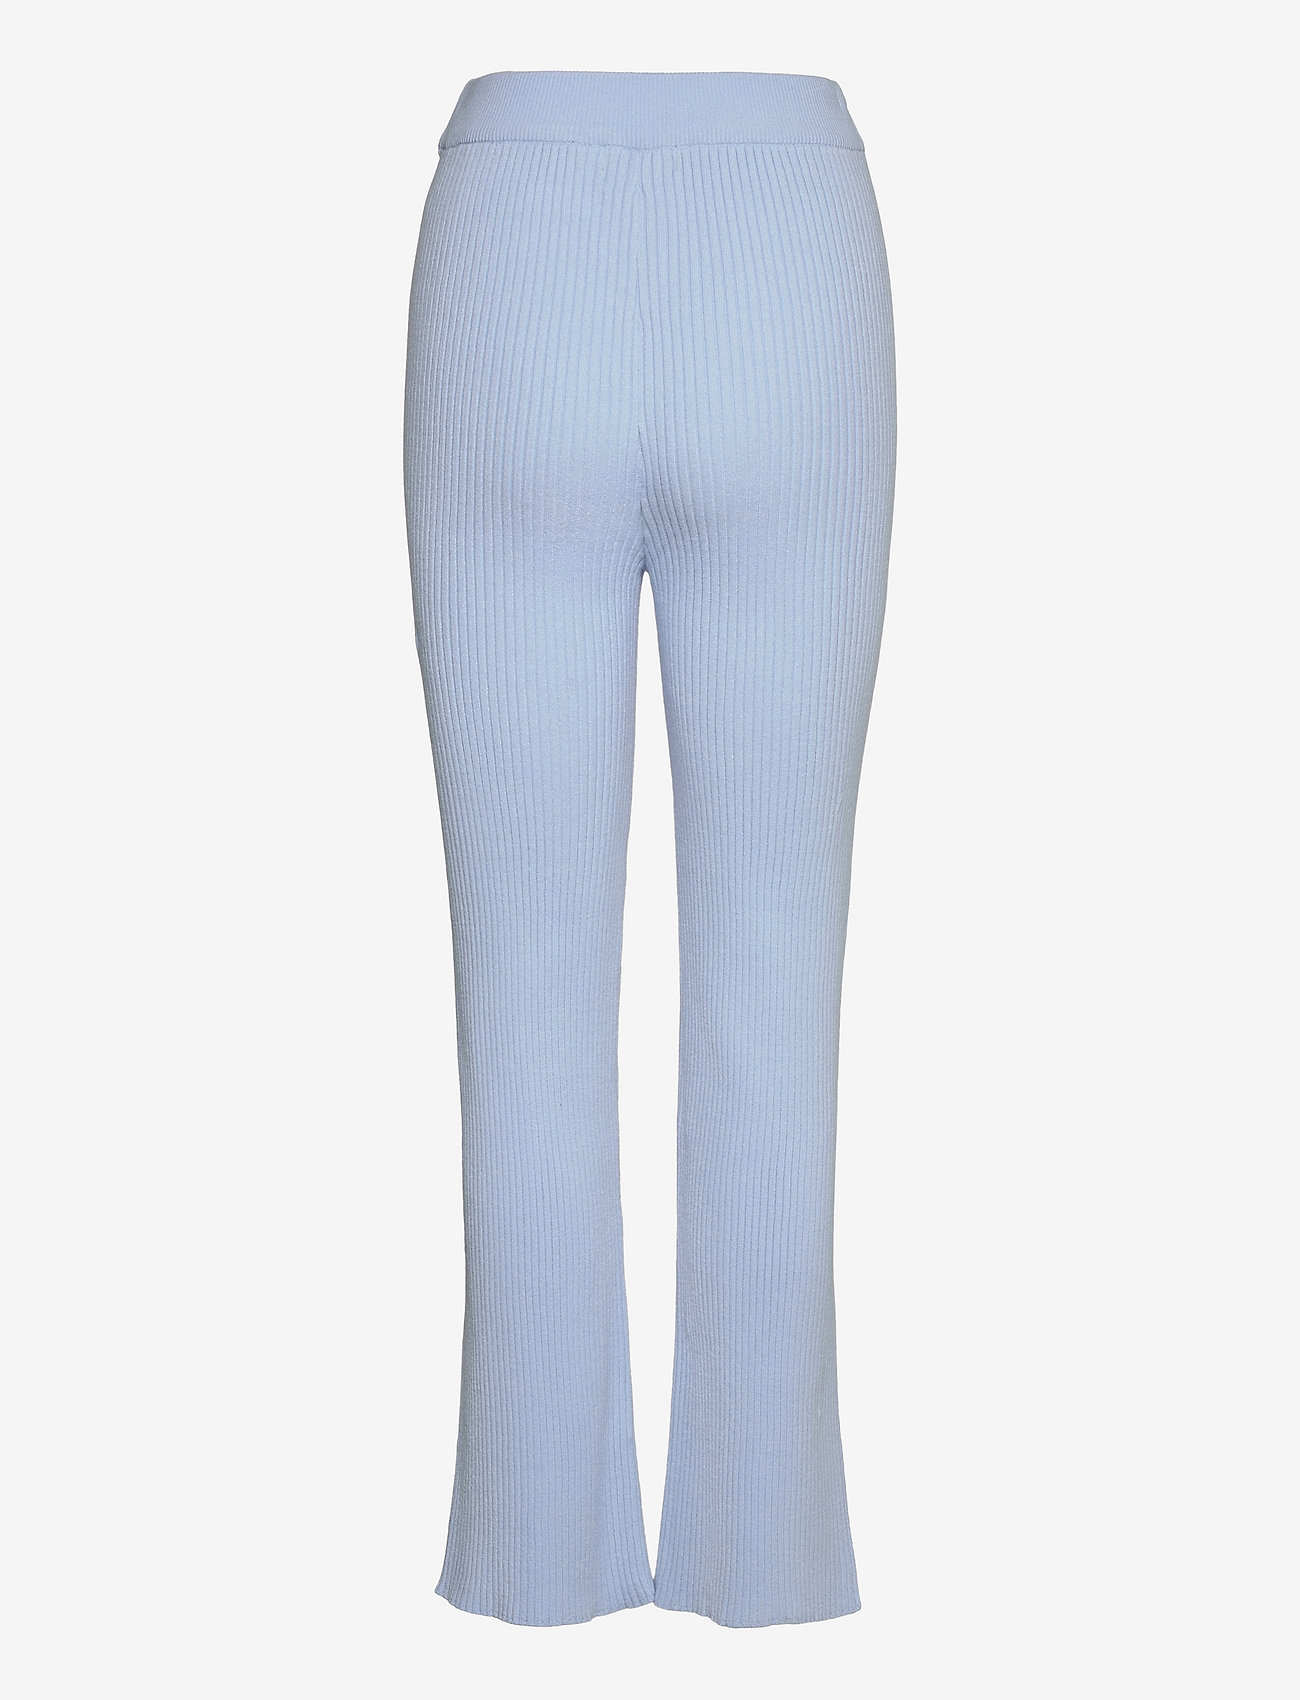 OW Collection - AVERY Pants - damen - 026 - blue - 1